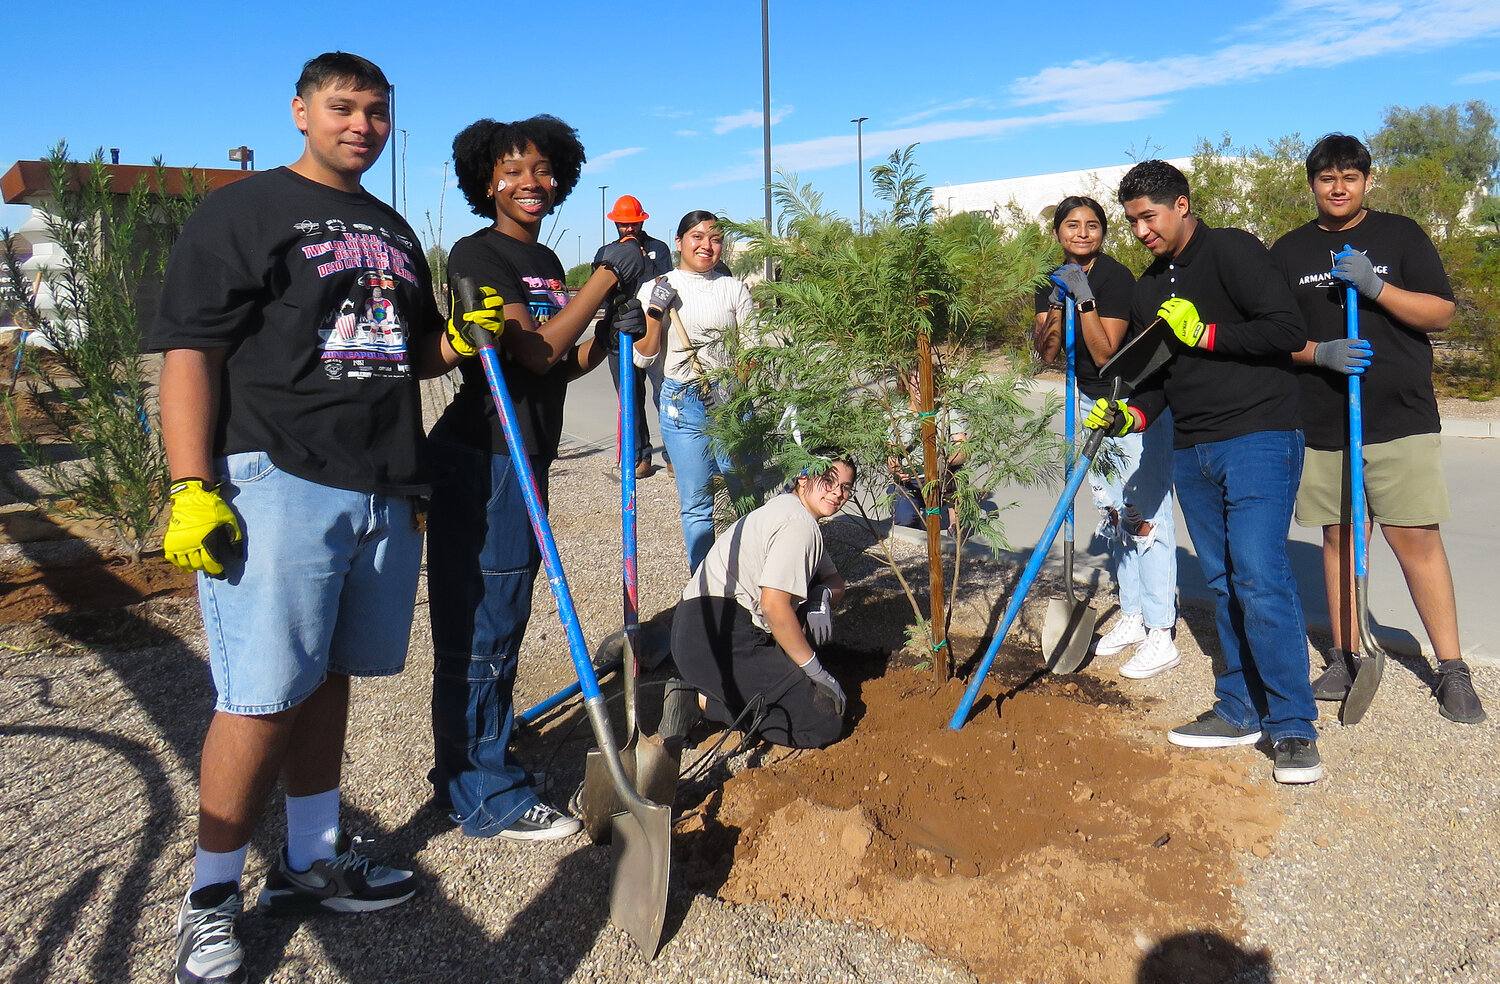 More than 60 volunteers from Meta, Mesa High School, Valley Metro and the Superstition Springs Center on Nov. 14 joined Mayor John Giles, Councilmember Scott Somers and Councilmember Julie Spilsbury at the event.